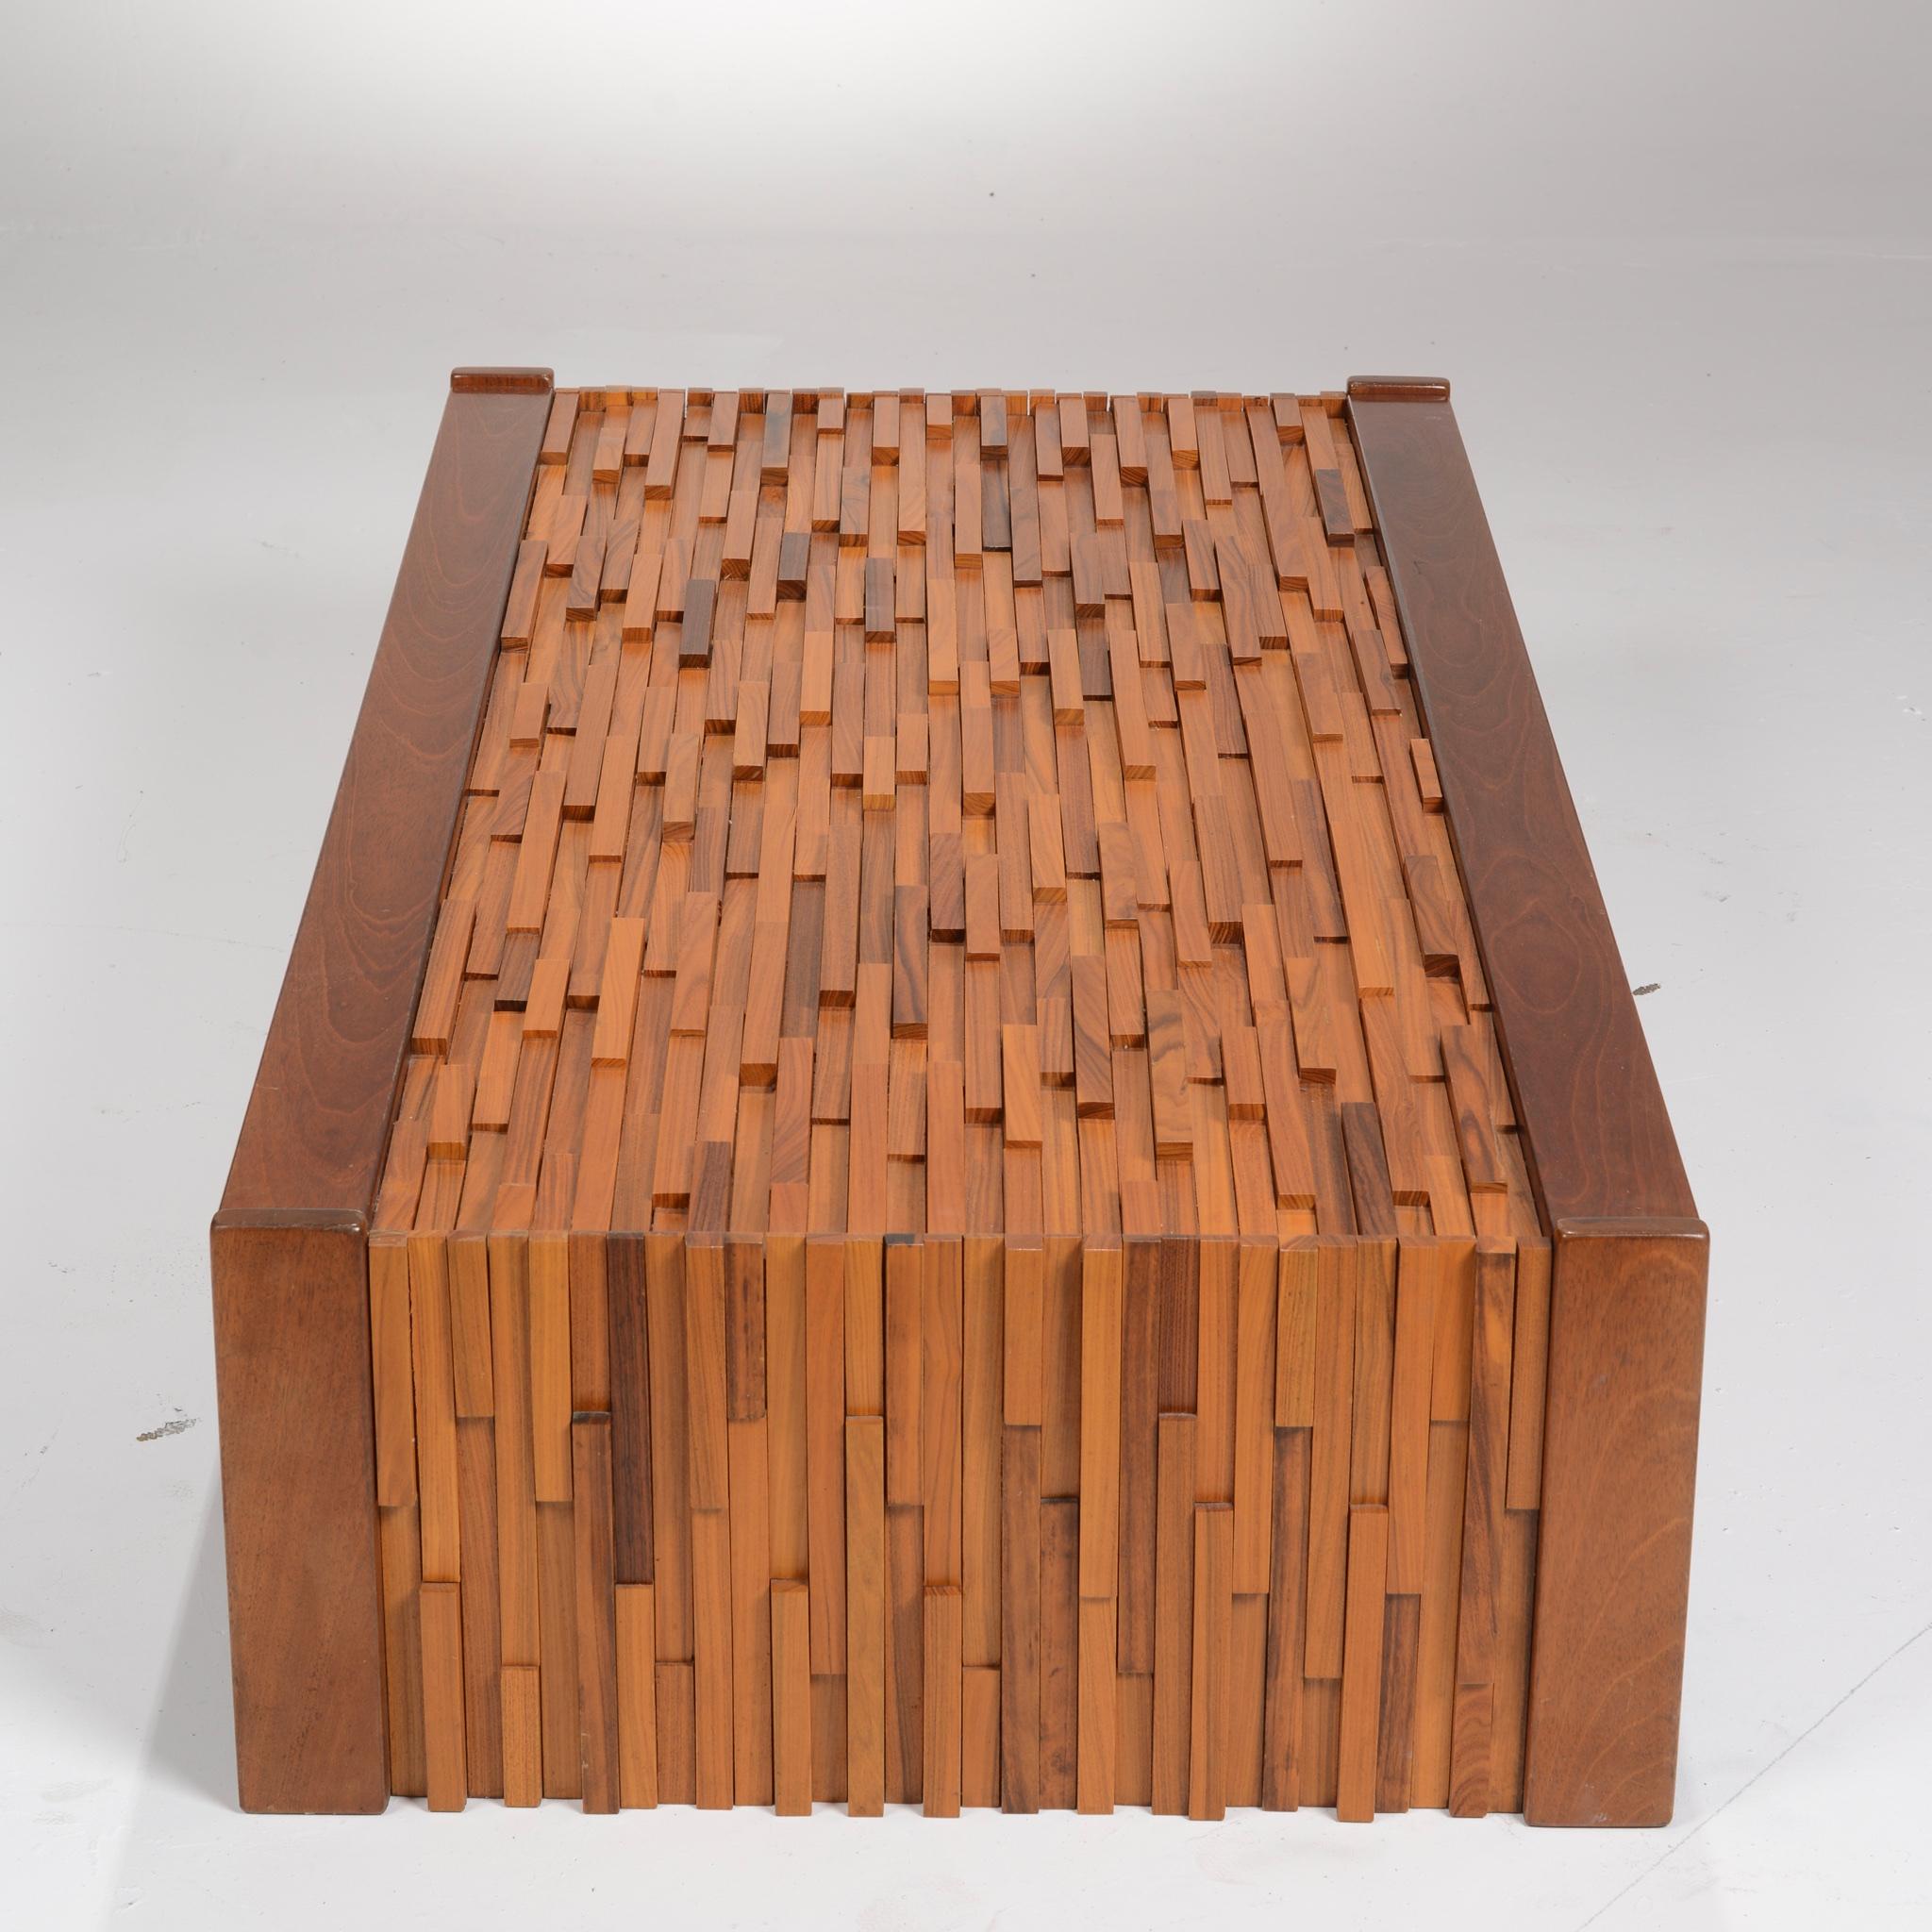 Sculptural coffee table designed and manufactured by Percival Lafer, Brazil, 1960. The table was made of several wooden parts including rosewood, teak and jacaranda.

All items are viewable at our Los Angeles Arts District showroom and warehouse. 